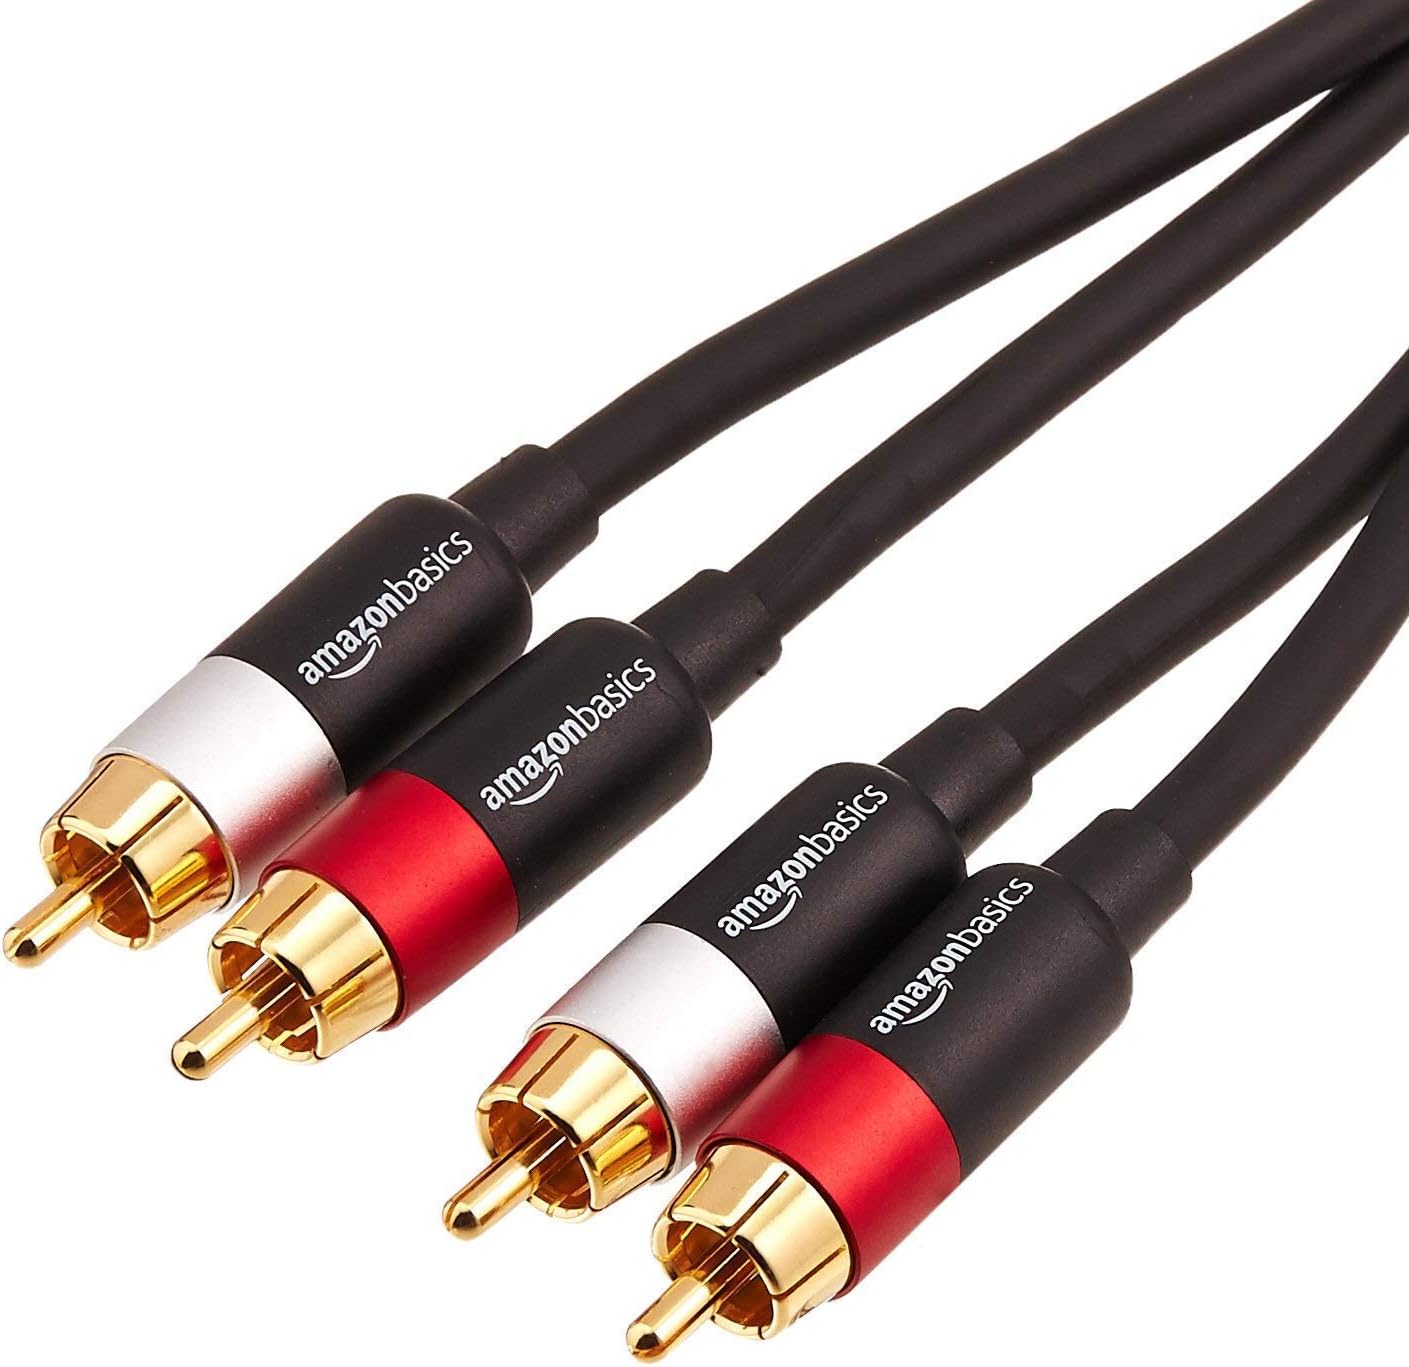 Amazon Basics 2 RCA Audio Cable for Stereo Speaker or [...]